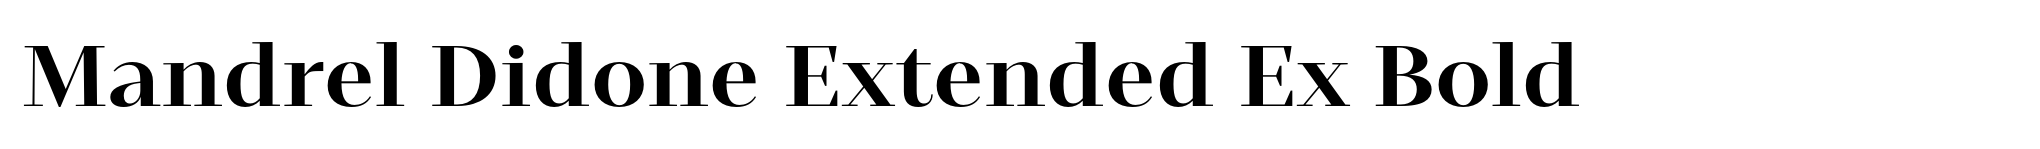 Mandrel Didone Extended Ex Bold image